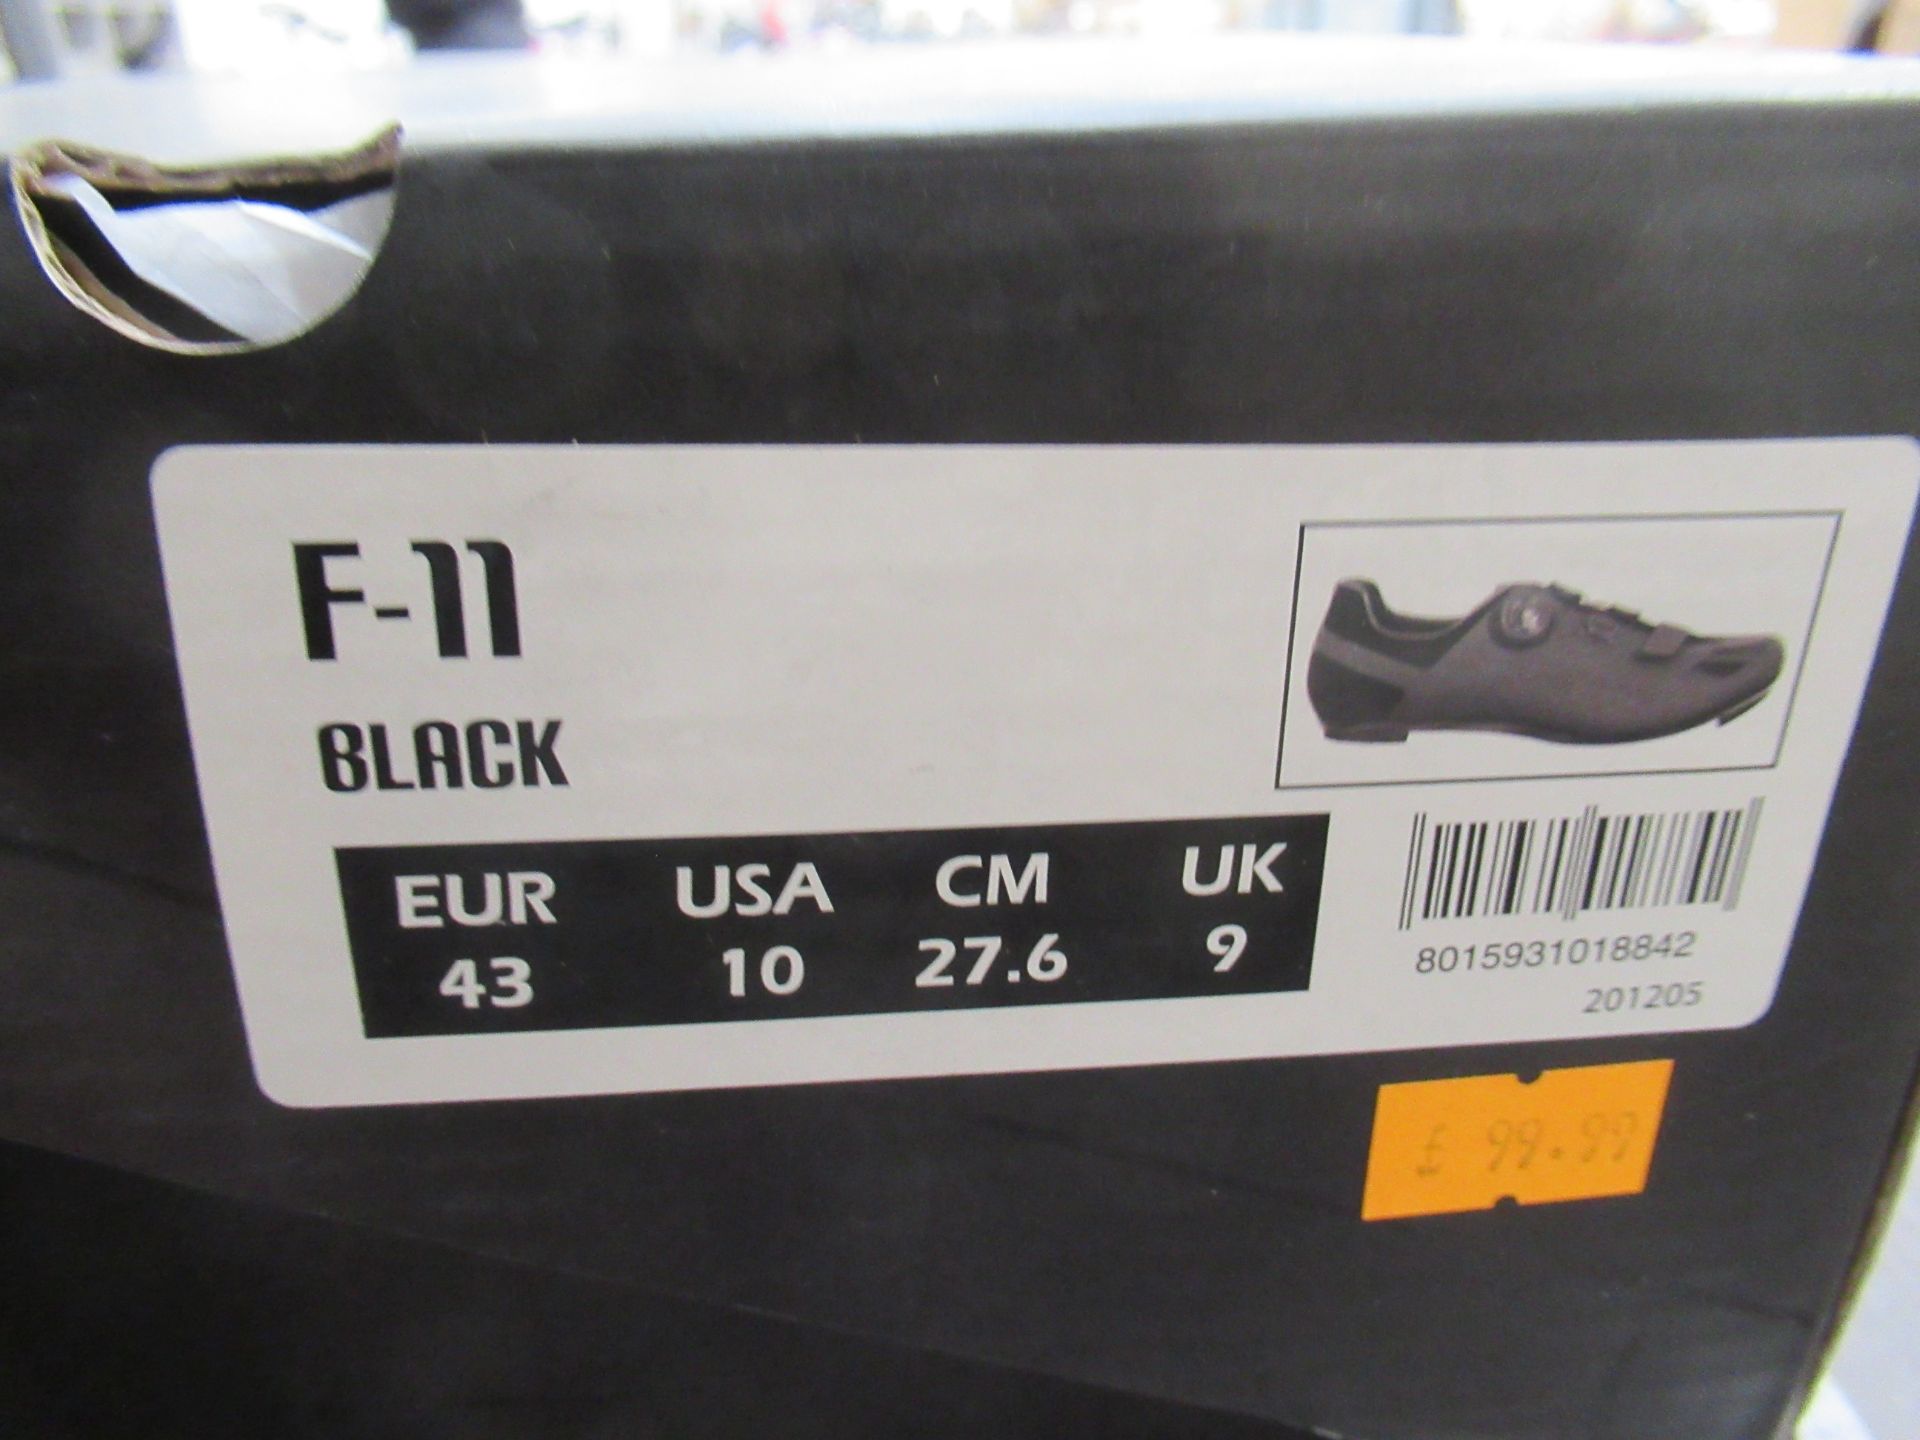 2 x Pairs of FLR cycling shoes - 1 x F-11 boxed EU size 43 (RRP£99.99) and 1 x F-35 III boxed EU siz - Image 2 of 7